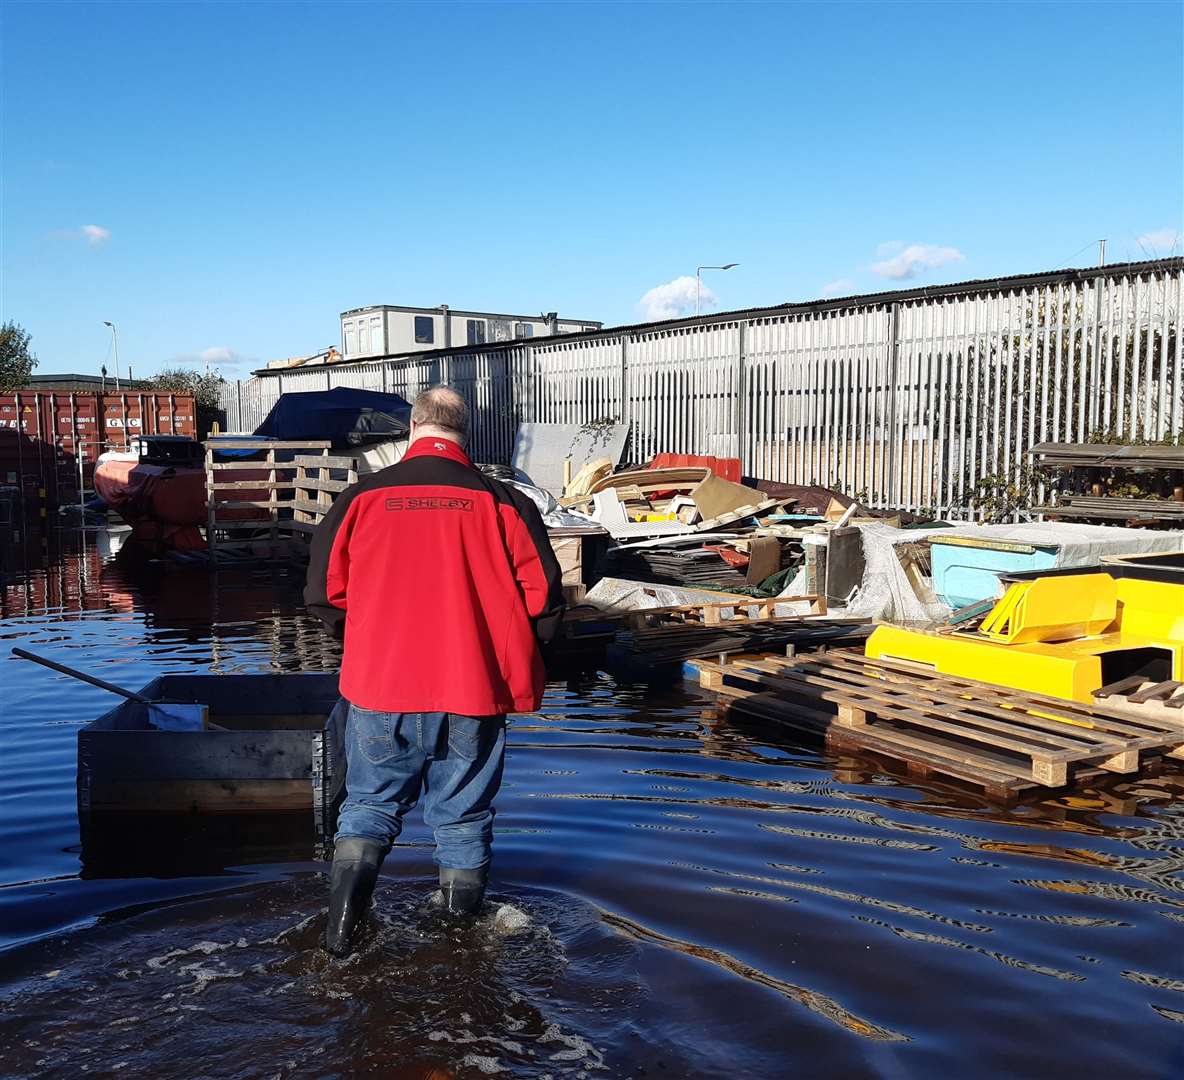 Mark Silvester says his business Dartford Composites is regularly impacted by bad flooding.